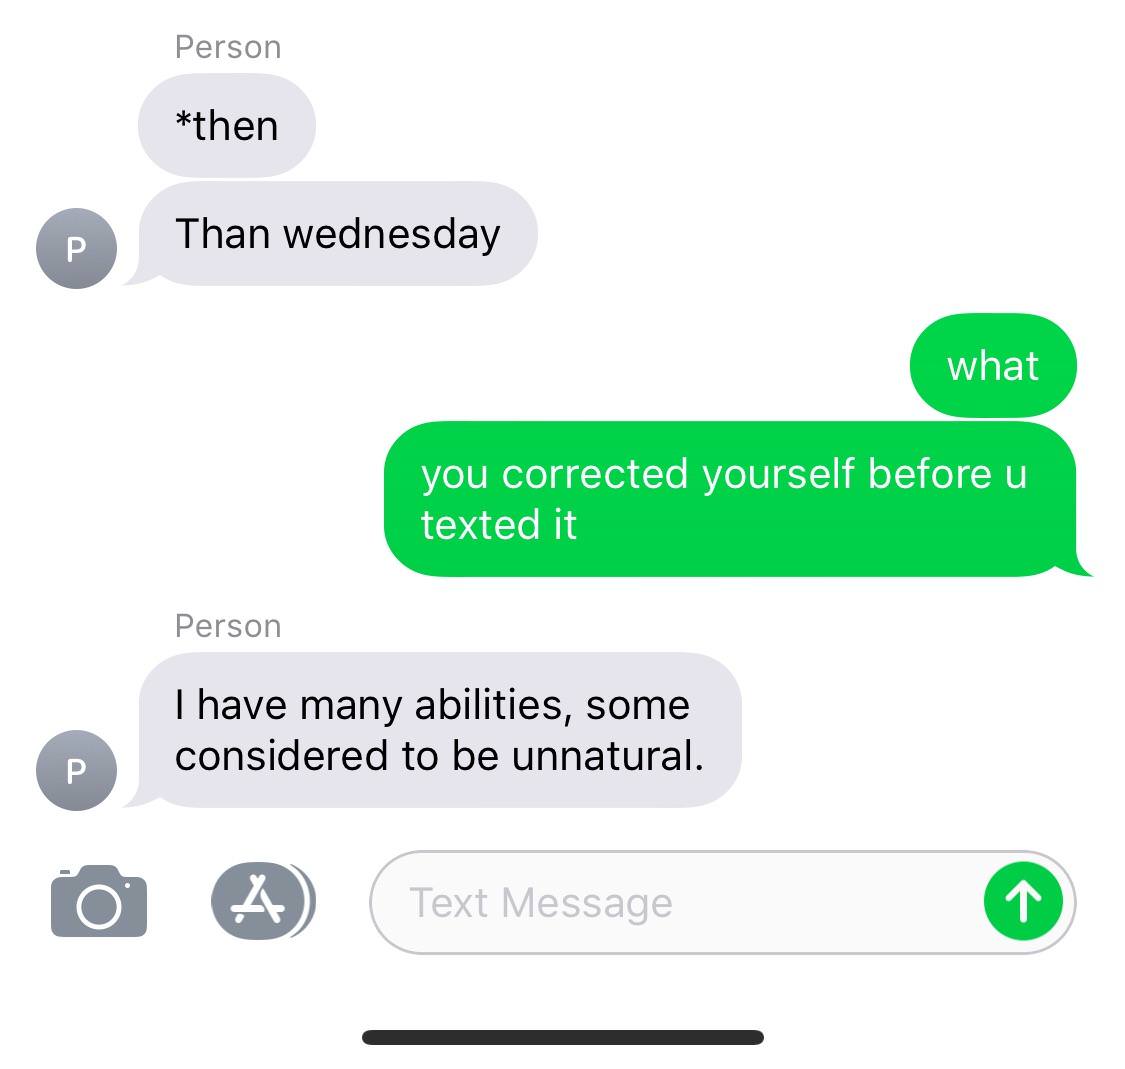 memes - hufflepuff x slytherin - Person then Than wednesday what you corrected yourself before u texted it Person Thave many abilities, some considered to be unnatural. O Text Message